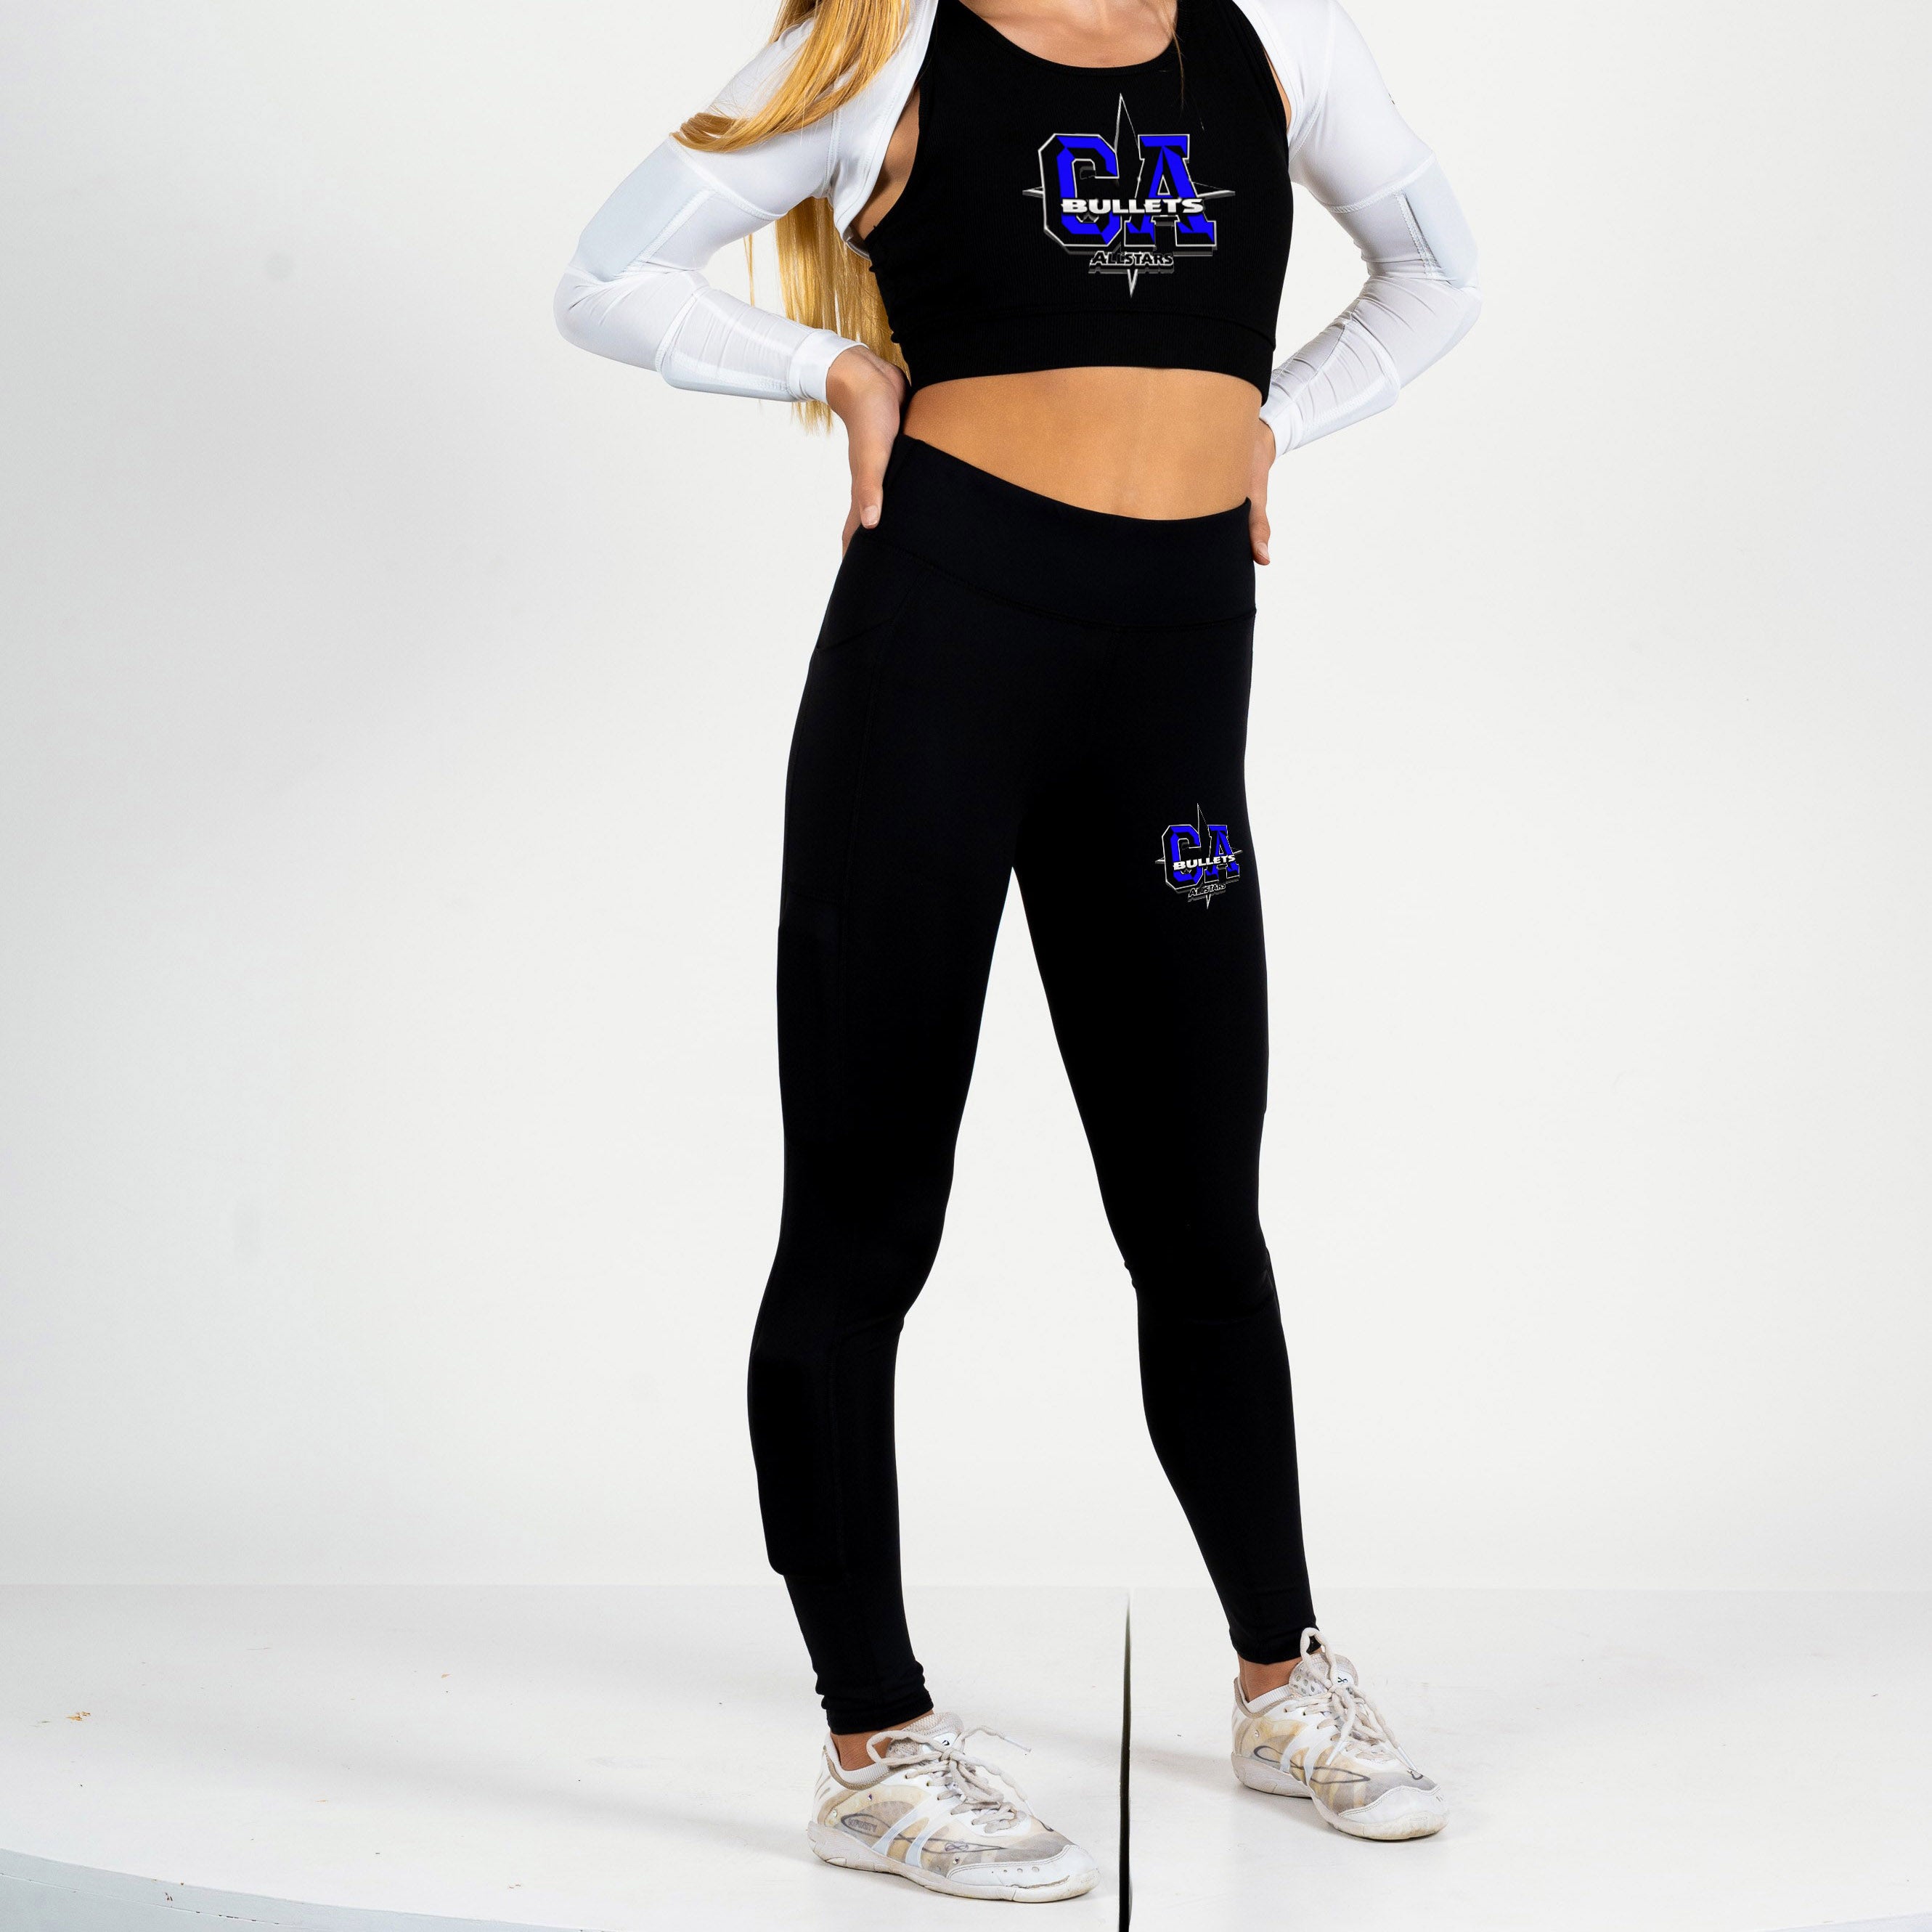 California All Stars Performance Weighted Legging